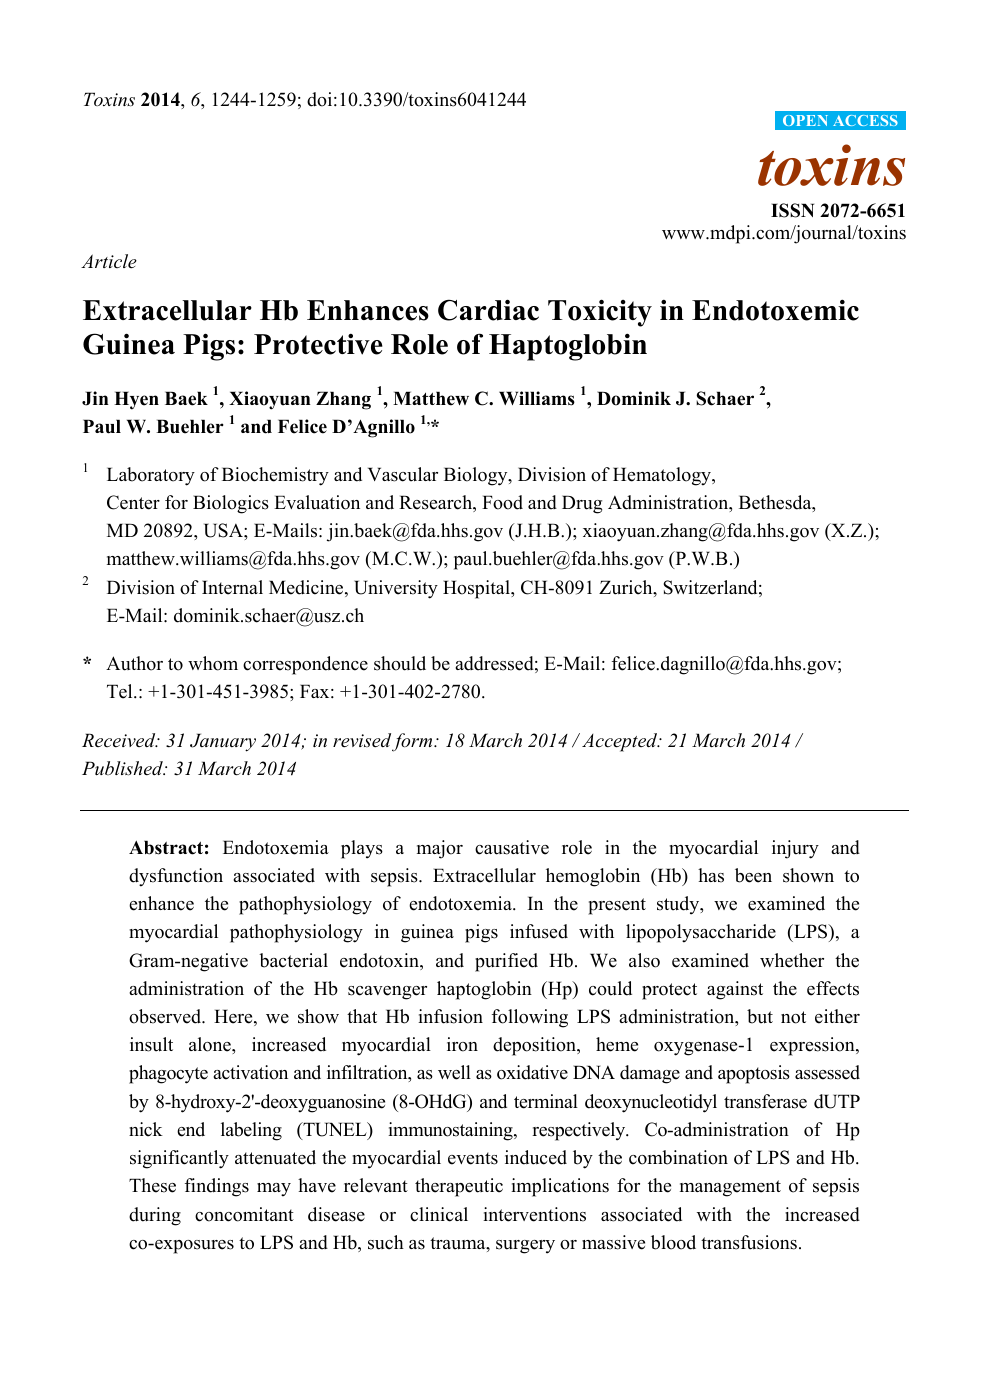 Extracellular Hb Enhances Cardiac Toxicity In Endotoxemic Guinea Pigs Protective Role Of Haptoglobin Topic Of Research Paper In Biological Sciences Download Scholarly Article Pdf And Read For Free On Cyberleninka Open